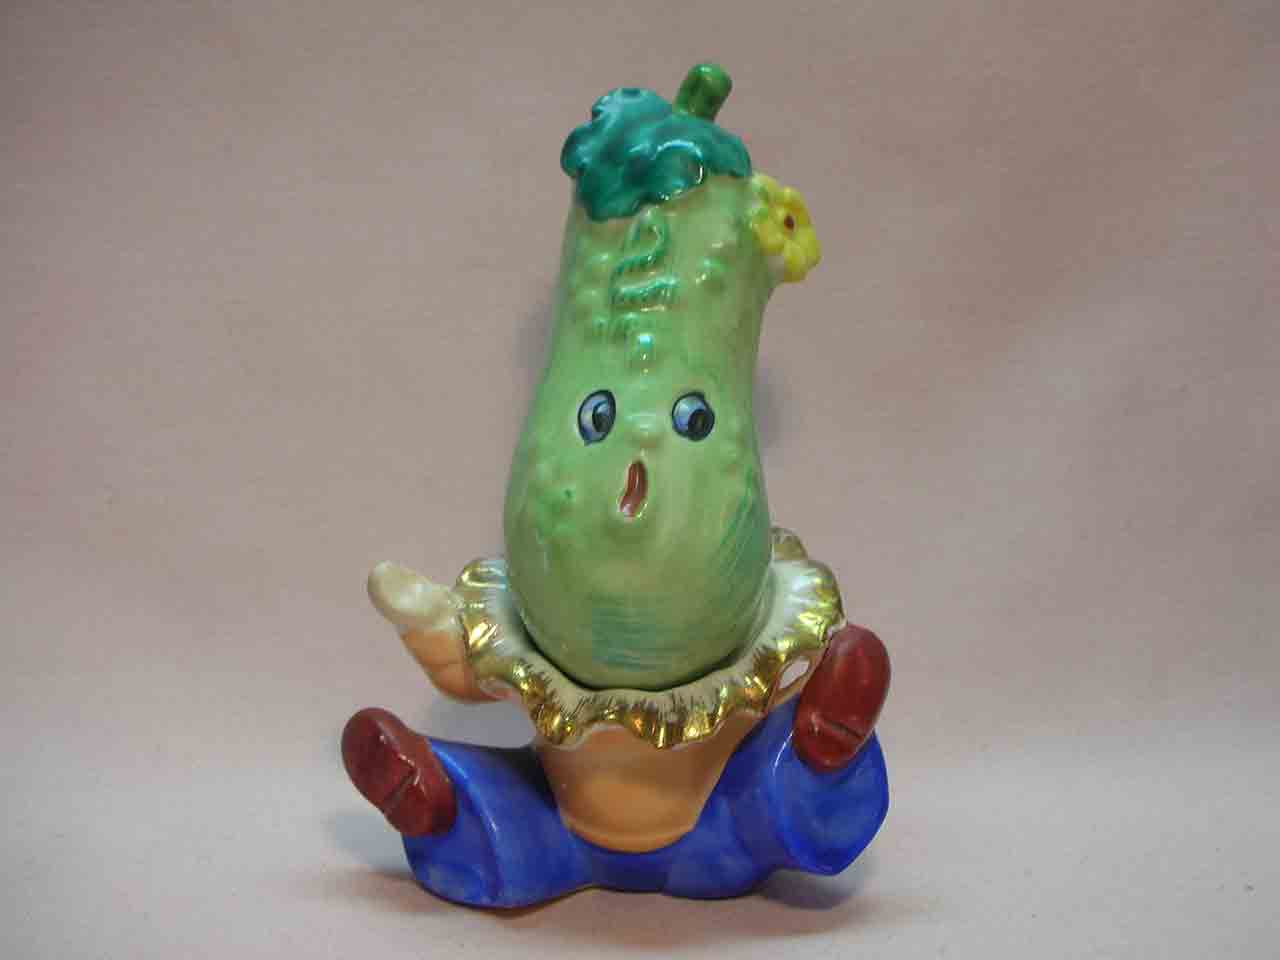 Anthropomorphic stacking cucumber salt and pepper shakers